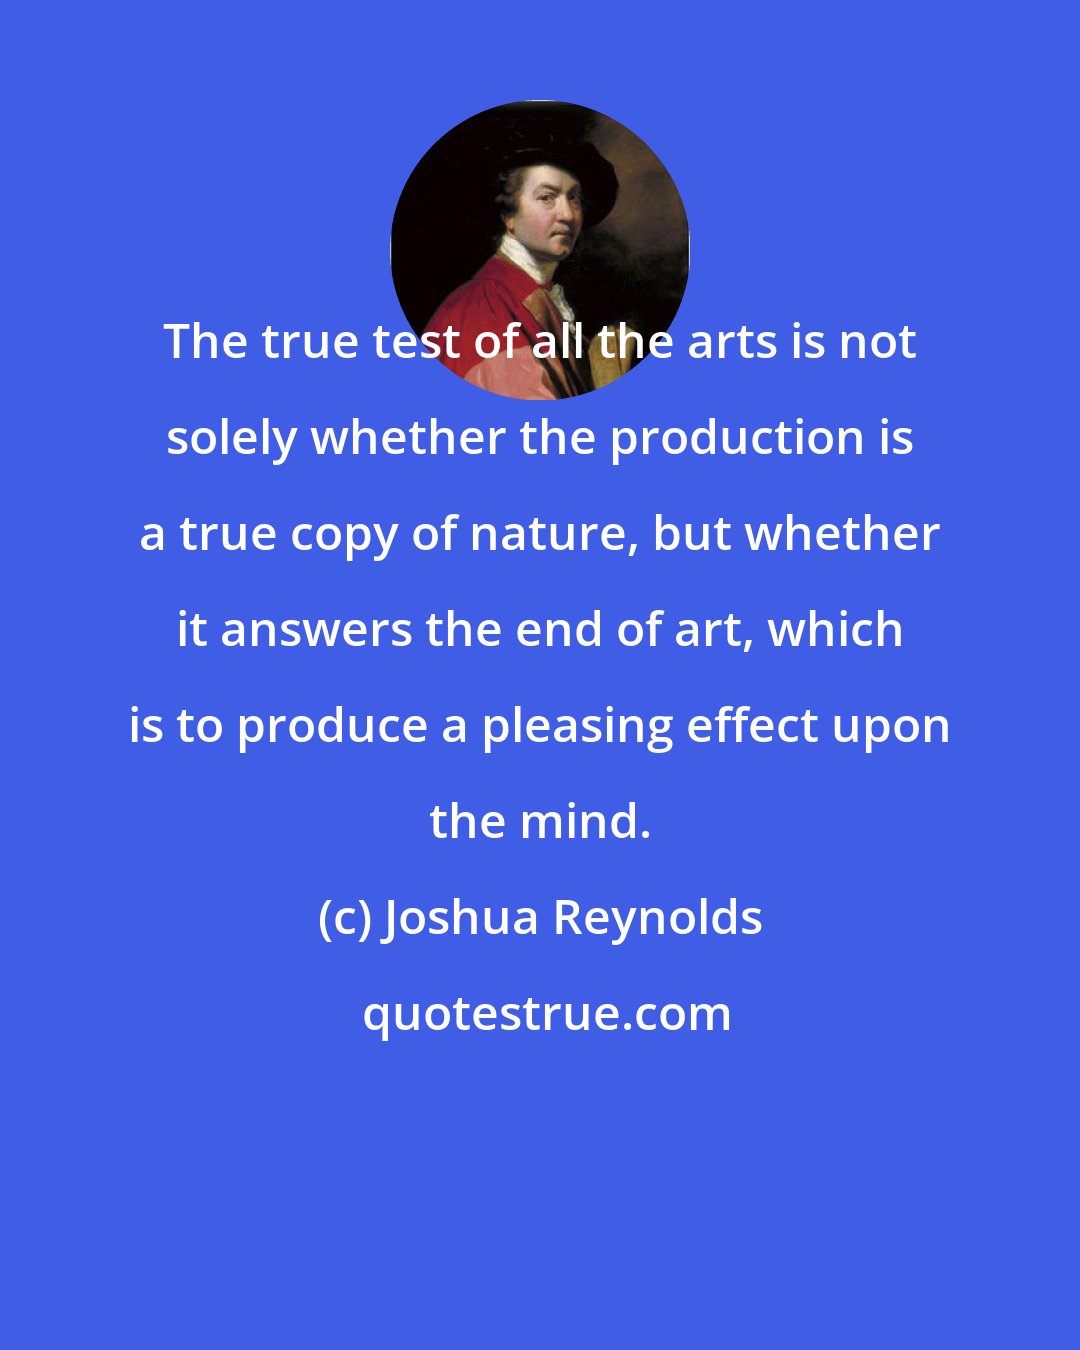 Joshua Reynolds: The true test of all the arts is not solely whether the production is a true copy of nature, but whether it answers the end of art, which is to produce a pleasing effect upon the mind.